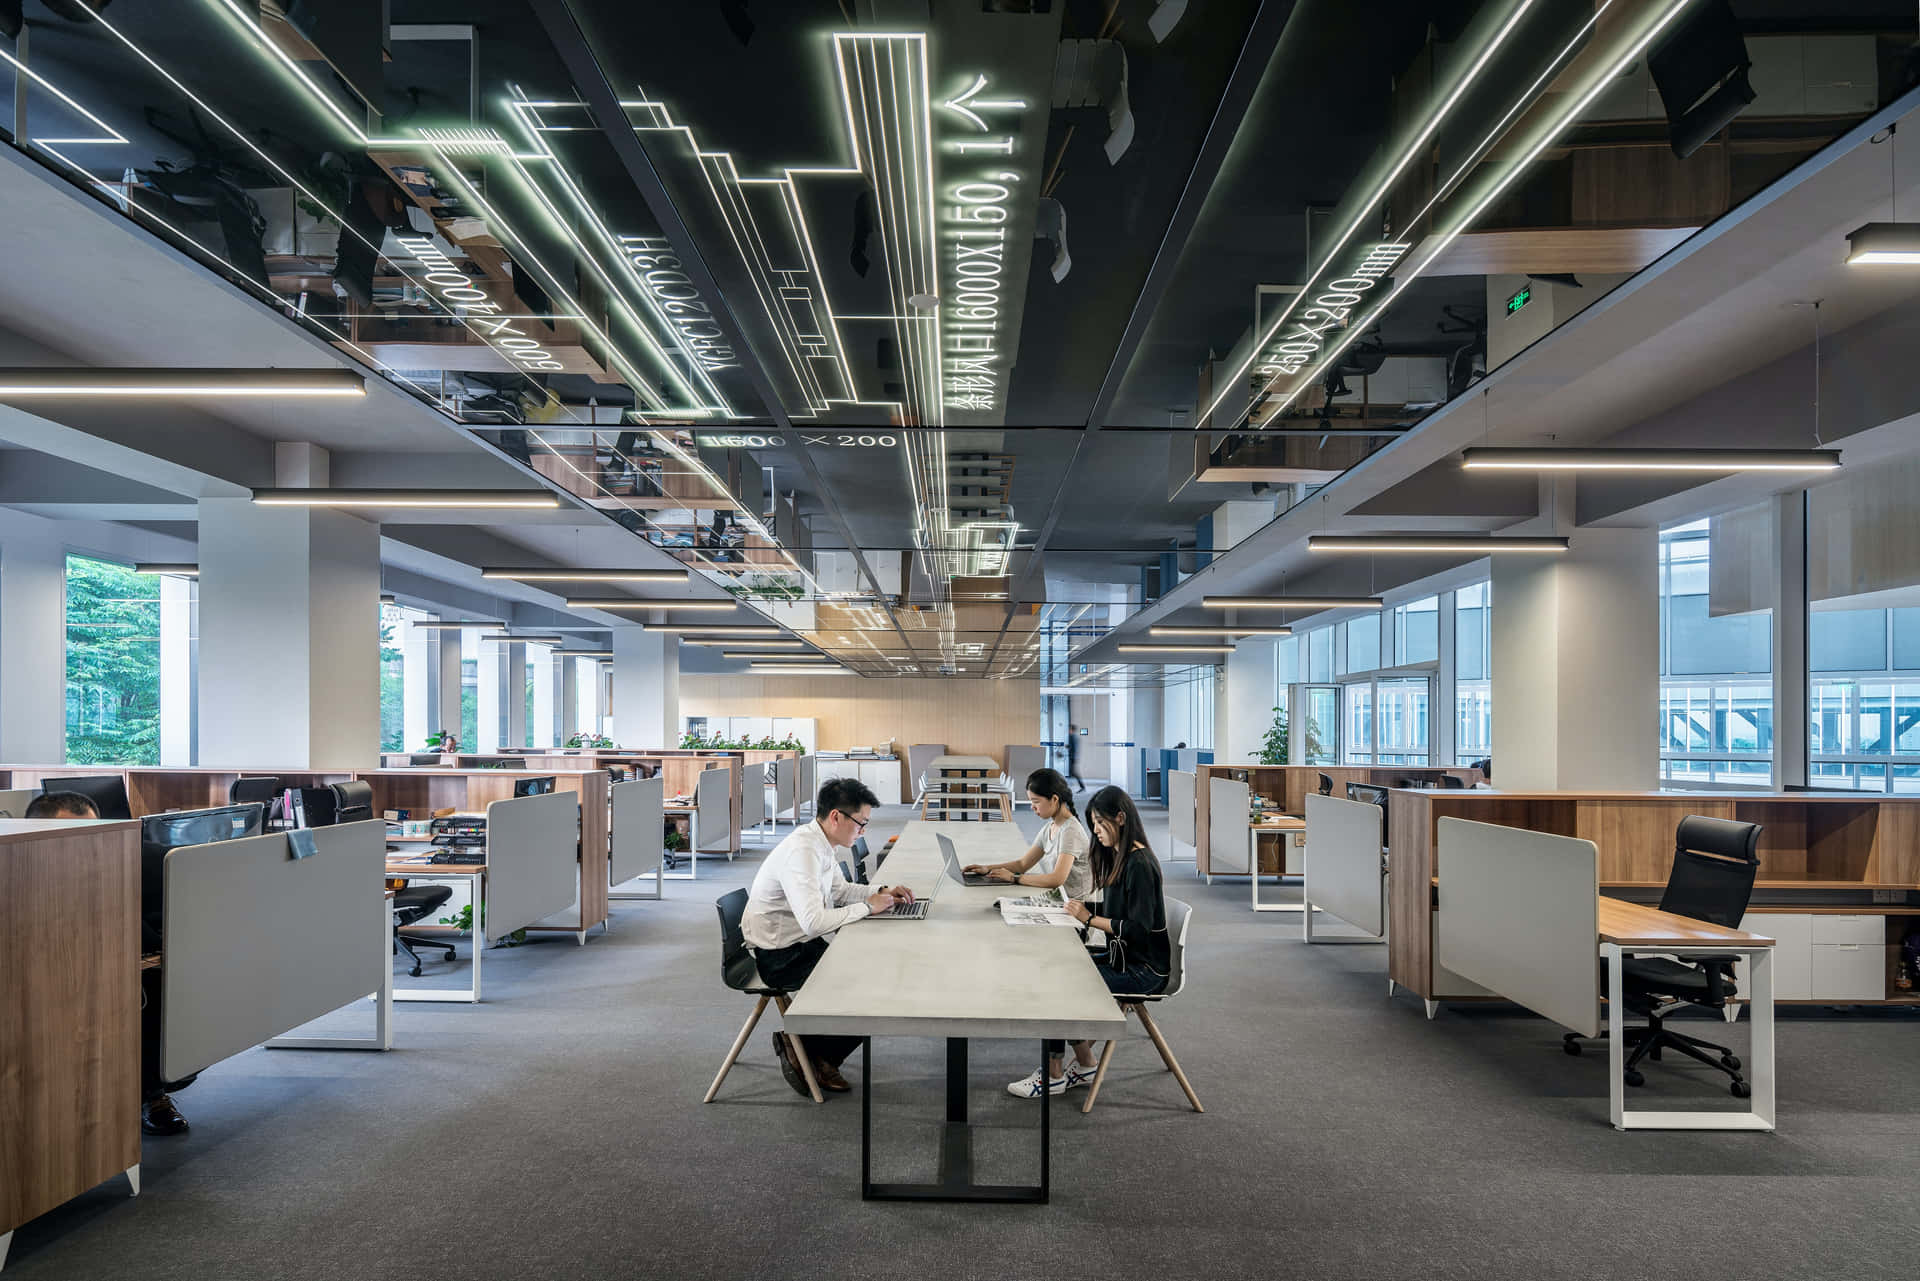 A Large Open Office With People Working At Desks